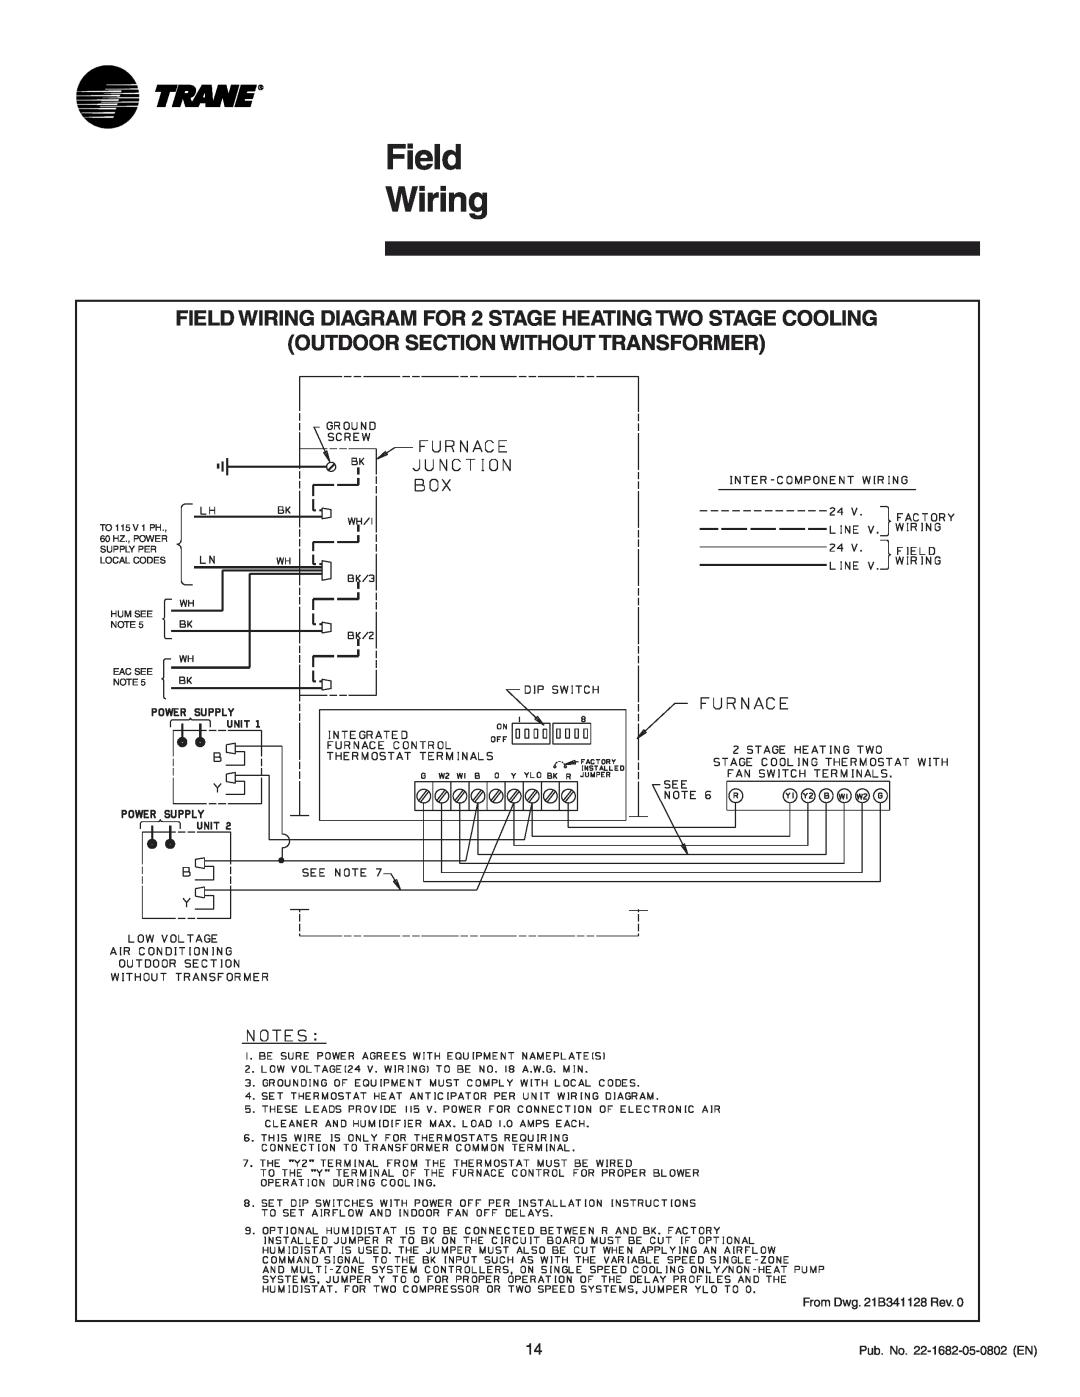 Trane 120R9V, XV 90 Field Wiring, Outdoor Section Without Transformer, From Dwg. 21B341128 Rev, Pub. No. 22-1682-05-0802EN 